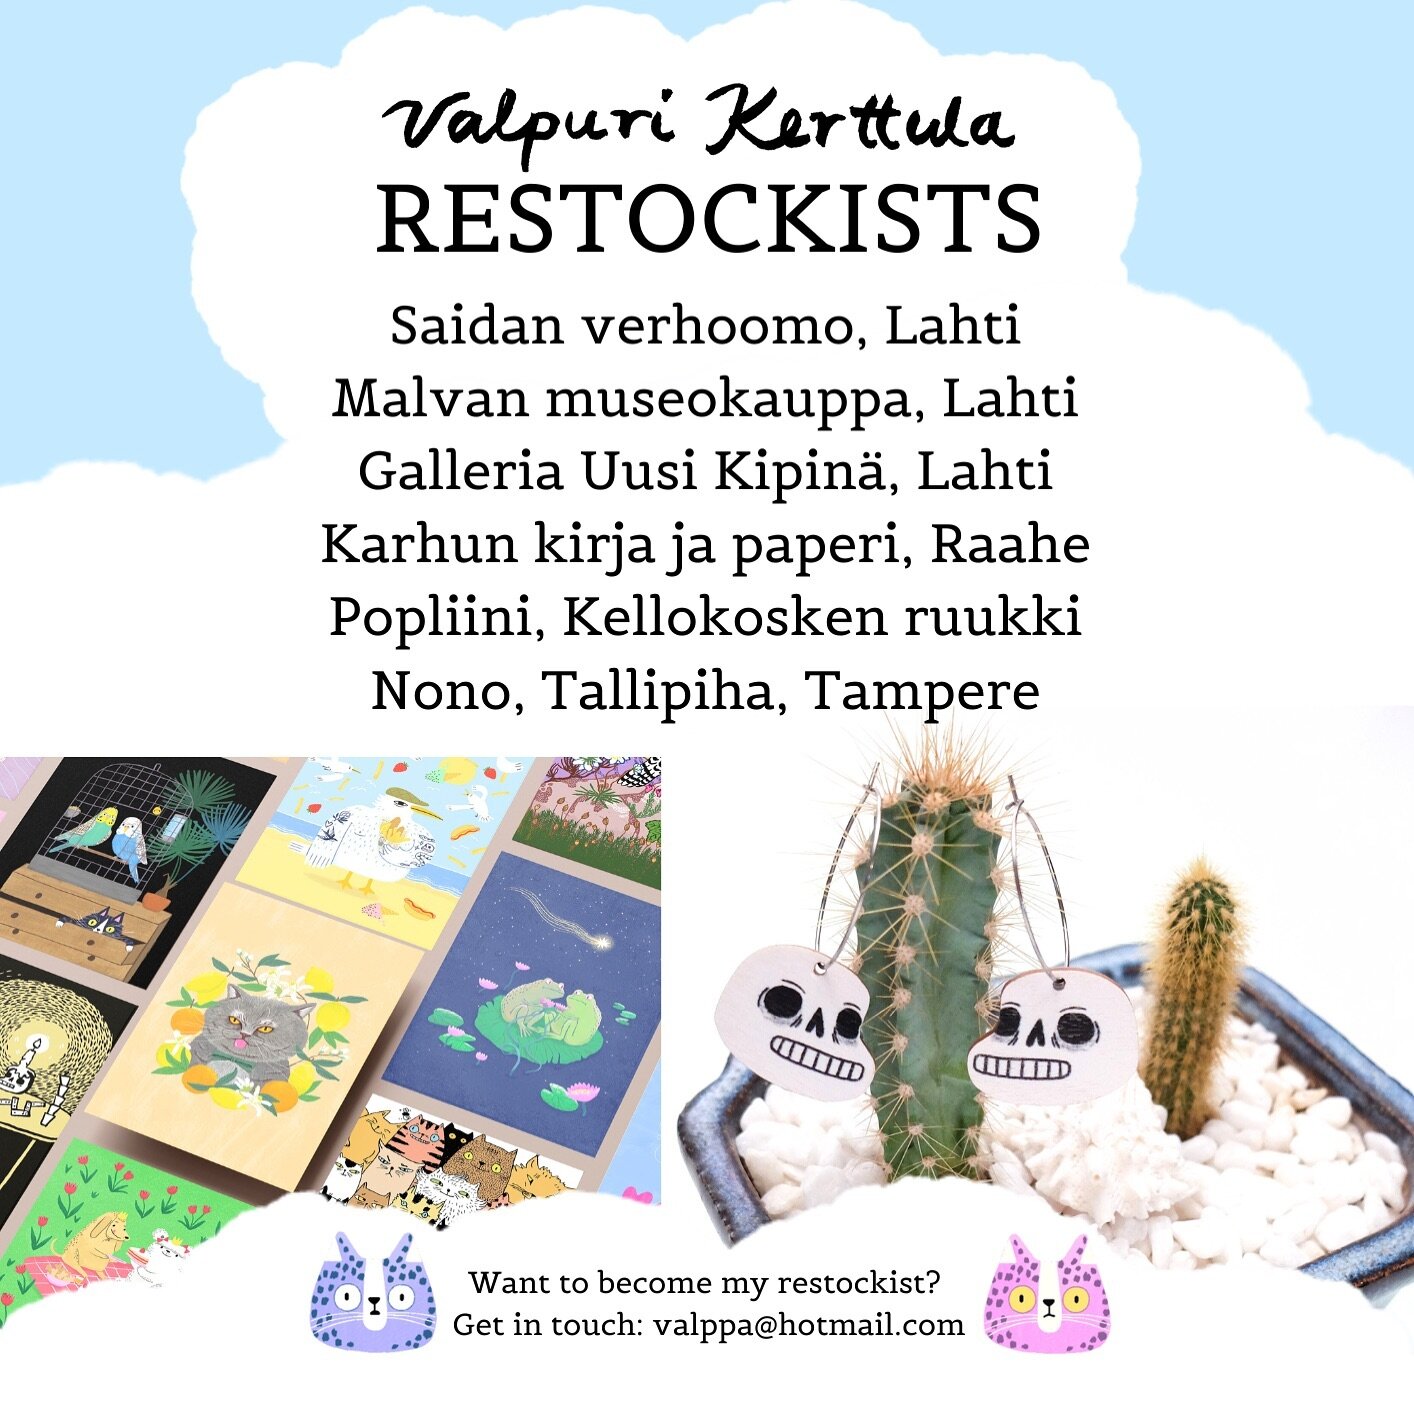 Here is my new and updated restockist list for you if you wish to see my art and products in real life🙂🌷🌷
I am also looking for new ones at the moment, so please let me know if you have any suggestions, I would love find a restockist in all the bi